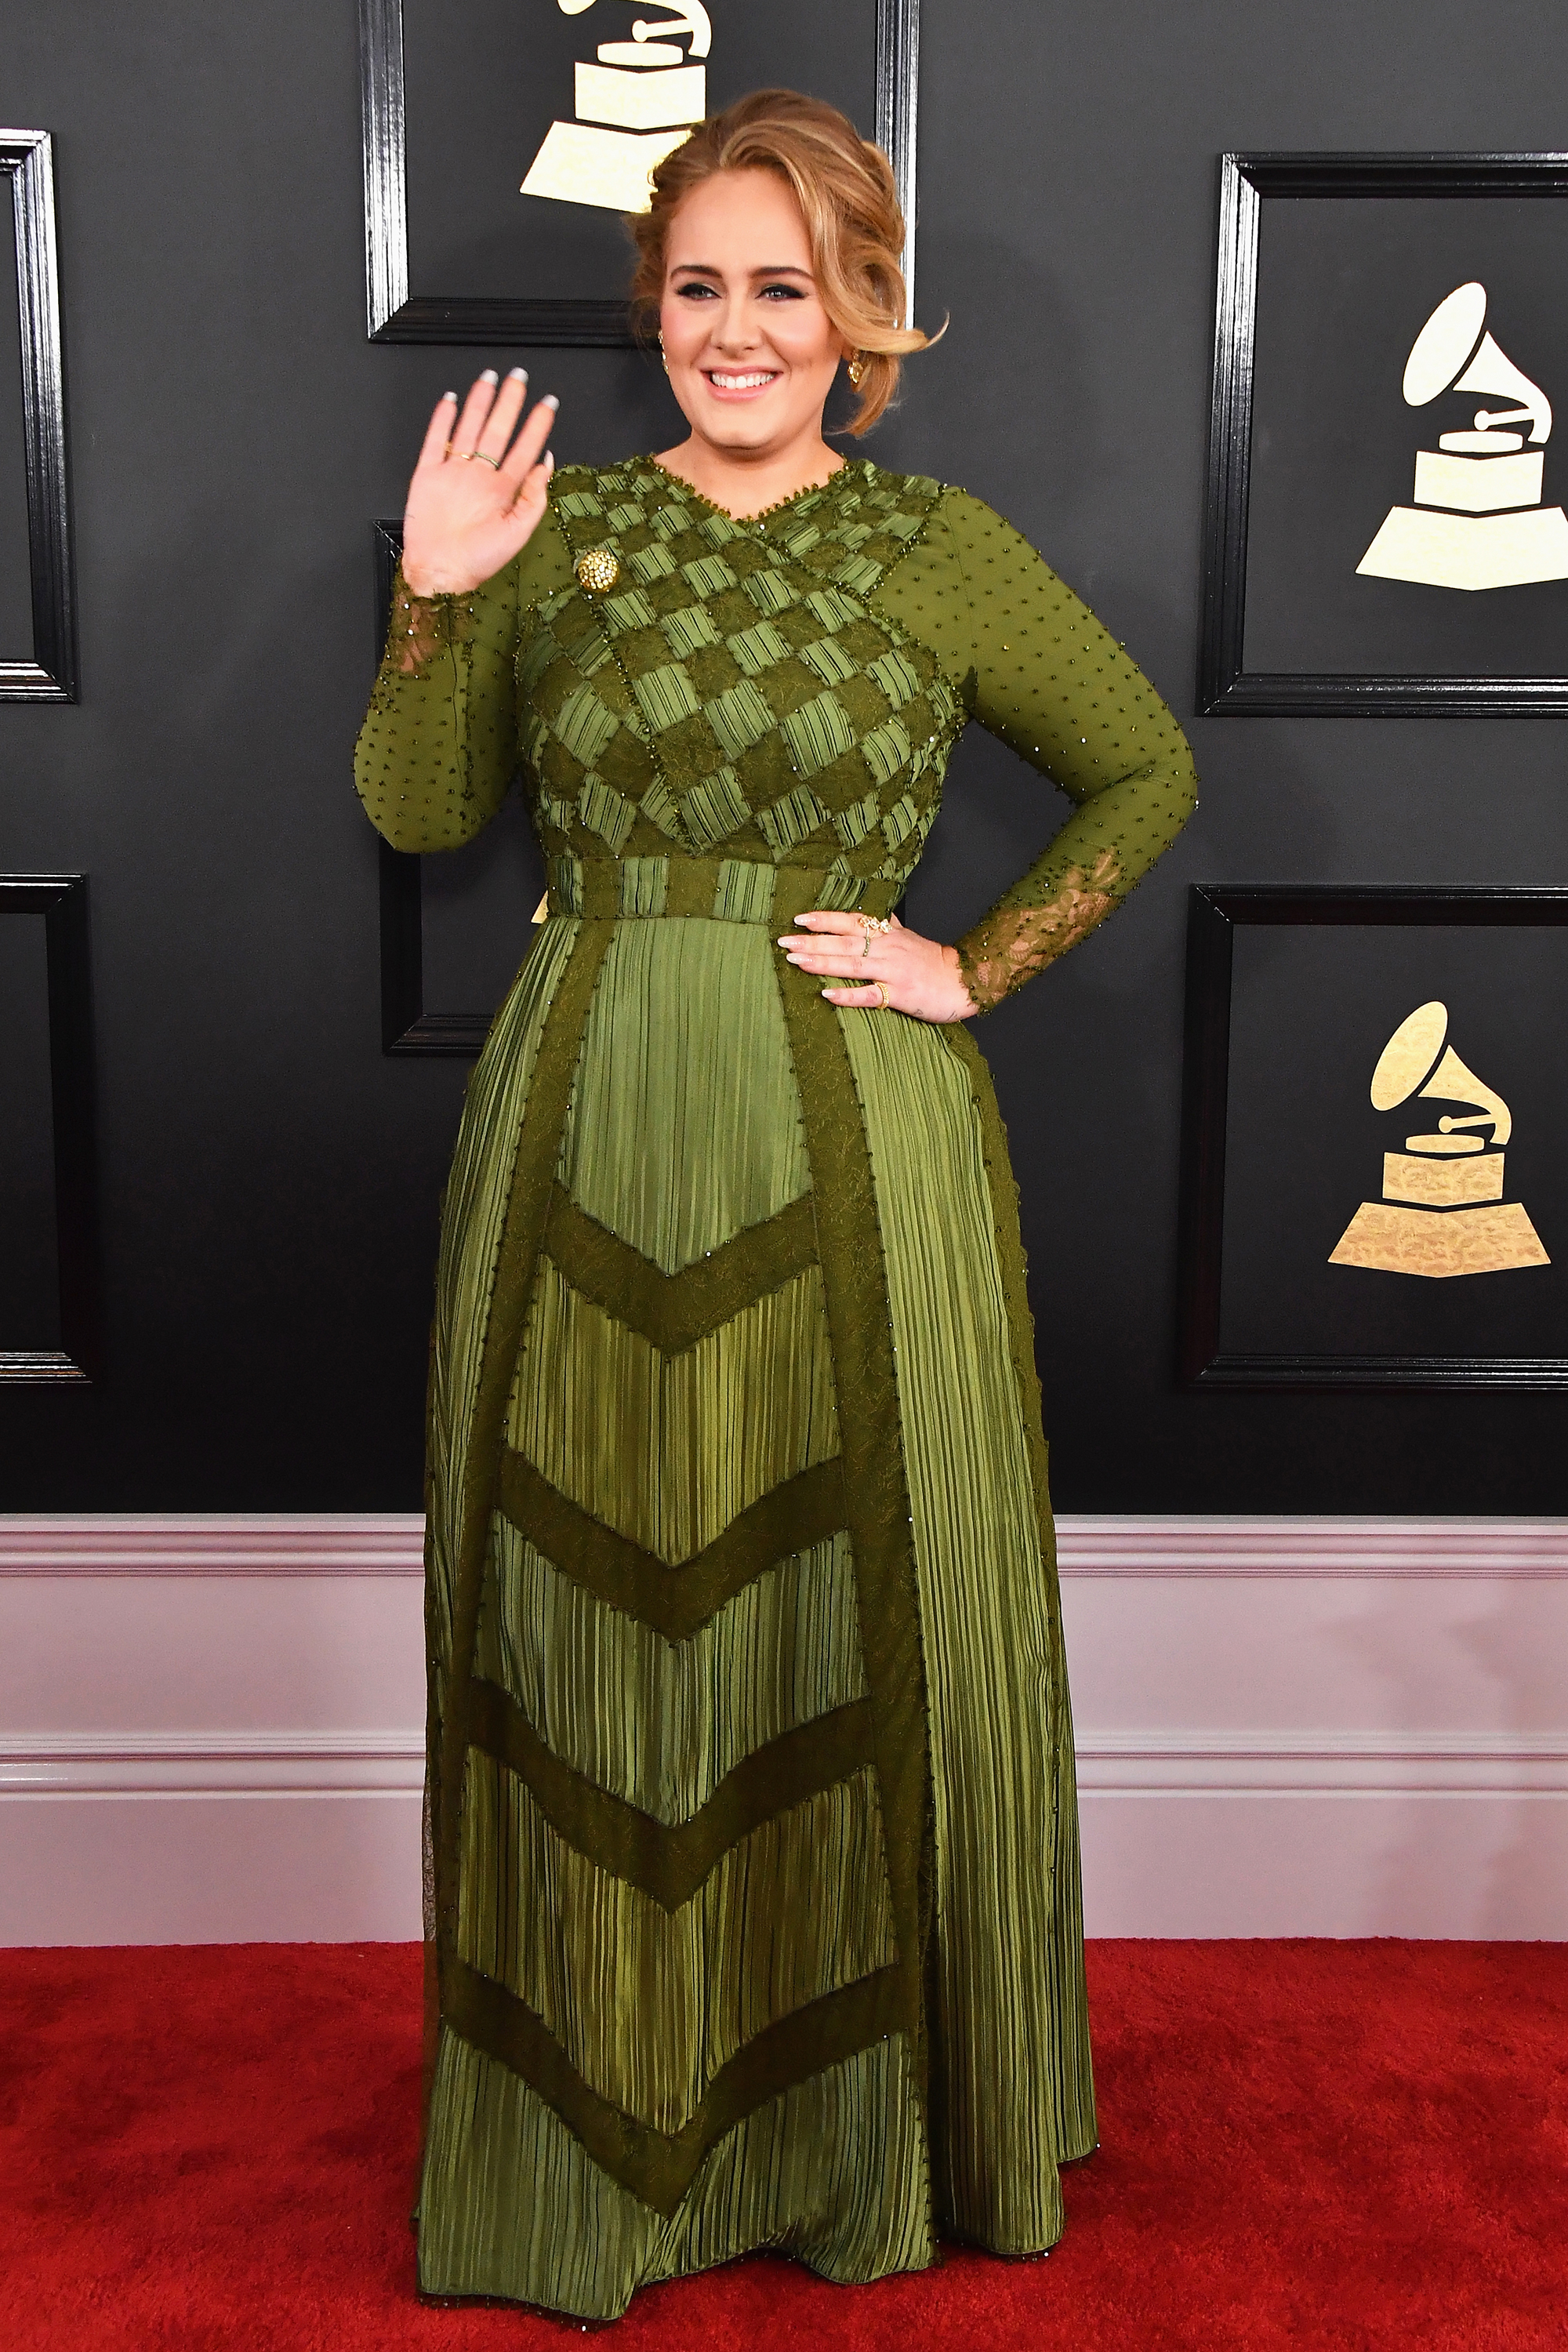 Adele attends The 59th GRAMMY Awards at STAPLES Center, on Feb. 12, 2017 in Los Angeles.